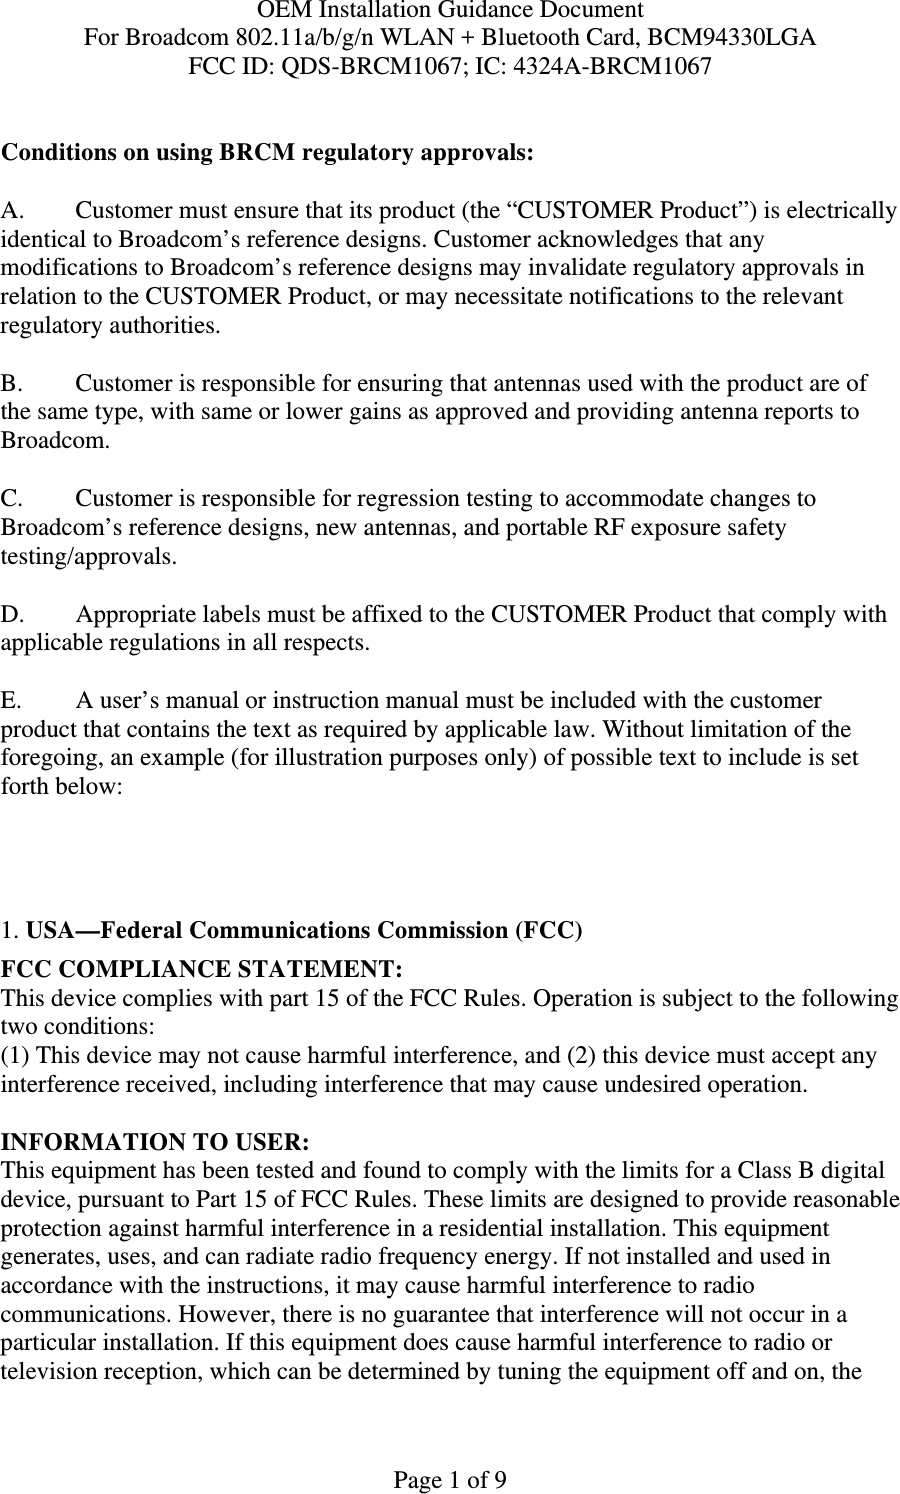 OEM Installation Guidance Document For Broadcom 802.11a/b/g/n WLAN + Bluetooth Card, BCM94330LGA FCC ID: QDS-BRCM1067; IC: 4324A-BRCM1067  Page 1 of 9  Conditions on using BRCM regulatory approvals:   A.  Customer must ensure that its product (the “CUSTOMER Product”) is electrically identical to Broadcom’s reference designs. Customer acknowledges that any modifications to Broadcom’s reference designs may invalidate regulatory approvals in relation to the CUSTOMER Product, or may necessitate notifications to the relevant regulatory authorities.  B.   Customer is responsible for ensuring that antennas used with the product are of the same type, with same or lower gains as approved and providing antenna reports to Broadcom.  C.   Customer is responsible for regression testing to accommodate changes to Broadcom’s reference designs, new antennas, and portable RF exposure safety testing/approvals.  D.  Appropriate labels must be affixed to the CUSTOMER Product that comply with applicable regulations in all respects.    E.  A user’s manual or instruction manual must be included with the customer product that contains the text as required by applicable law. Without limitation of the foregoing, an example (for illustration purposes only) of possible text to include is set forth below:       1. USA—Federal Communications Commission (FCC) FCC COMPLIANCE STATEMENT: This device complies with part 15 of the FCC Rules. Operation is subject to the following two conditions: (1) This device may not cause harmful interference, and (2) this device must accept any interference received, including interference that may cause undesired operation.  INFORMATION TO USER: This equipment has been tested and found to comply with the limits for a Class B digital device, pursuant to Part 15 of FCC Rules. These limits are designed to provide reasonable protection against harmful interference in a residential installation. This equipment generates, uses, and can radiate radio frequency energy. If not installed and used in accordance with the instructions, it may cause harmful interference to radio communications. However, there is no guarantee that interference will not occur in a particular installation. If this equipment does cause harmful interference to radio or television reception, which can be determined by tuning the equipment off and on, the 